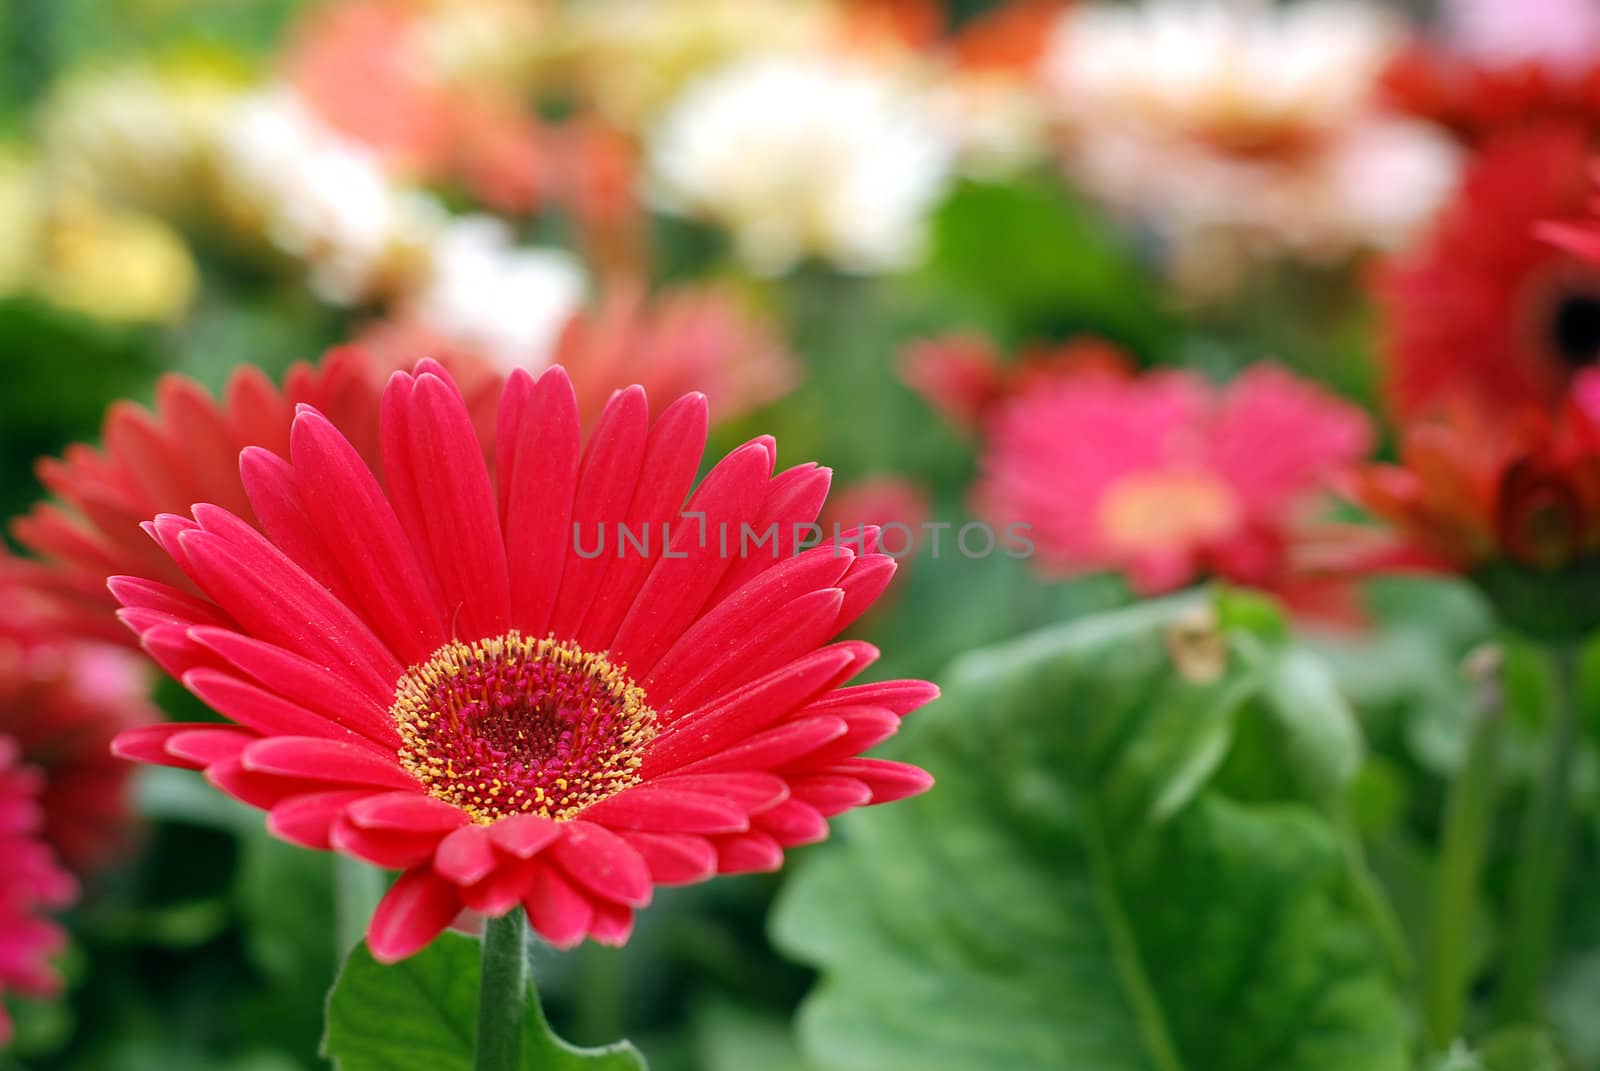 Red Gerbera daisy with shallow depth of field